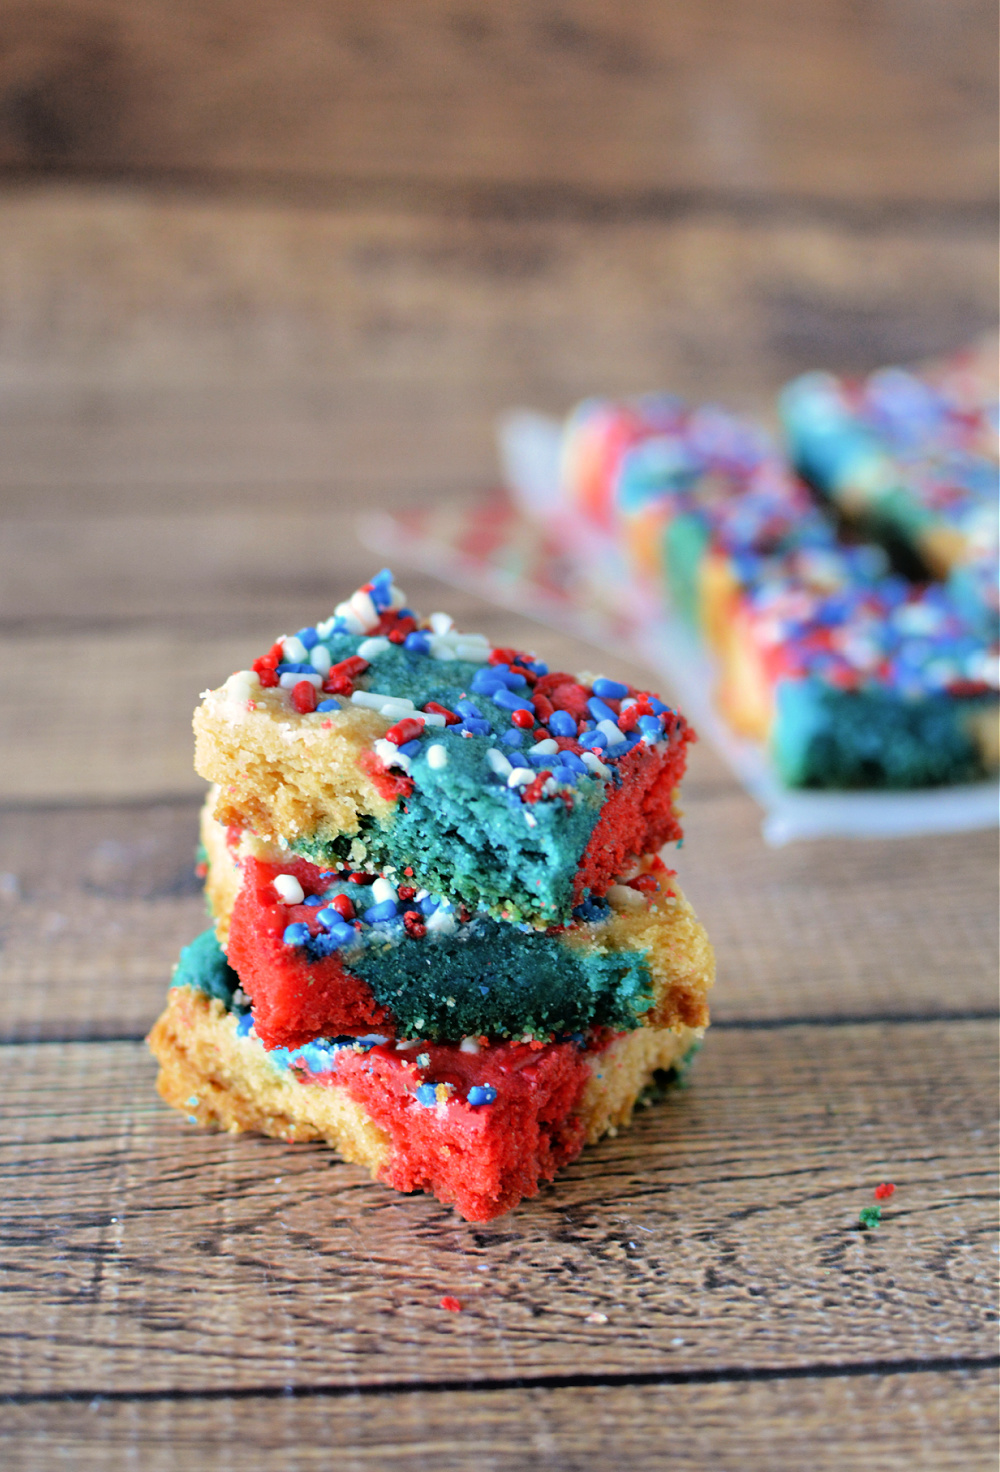 Red White and Blue Shortbread